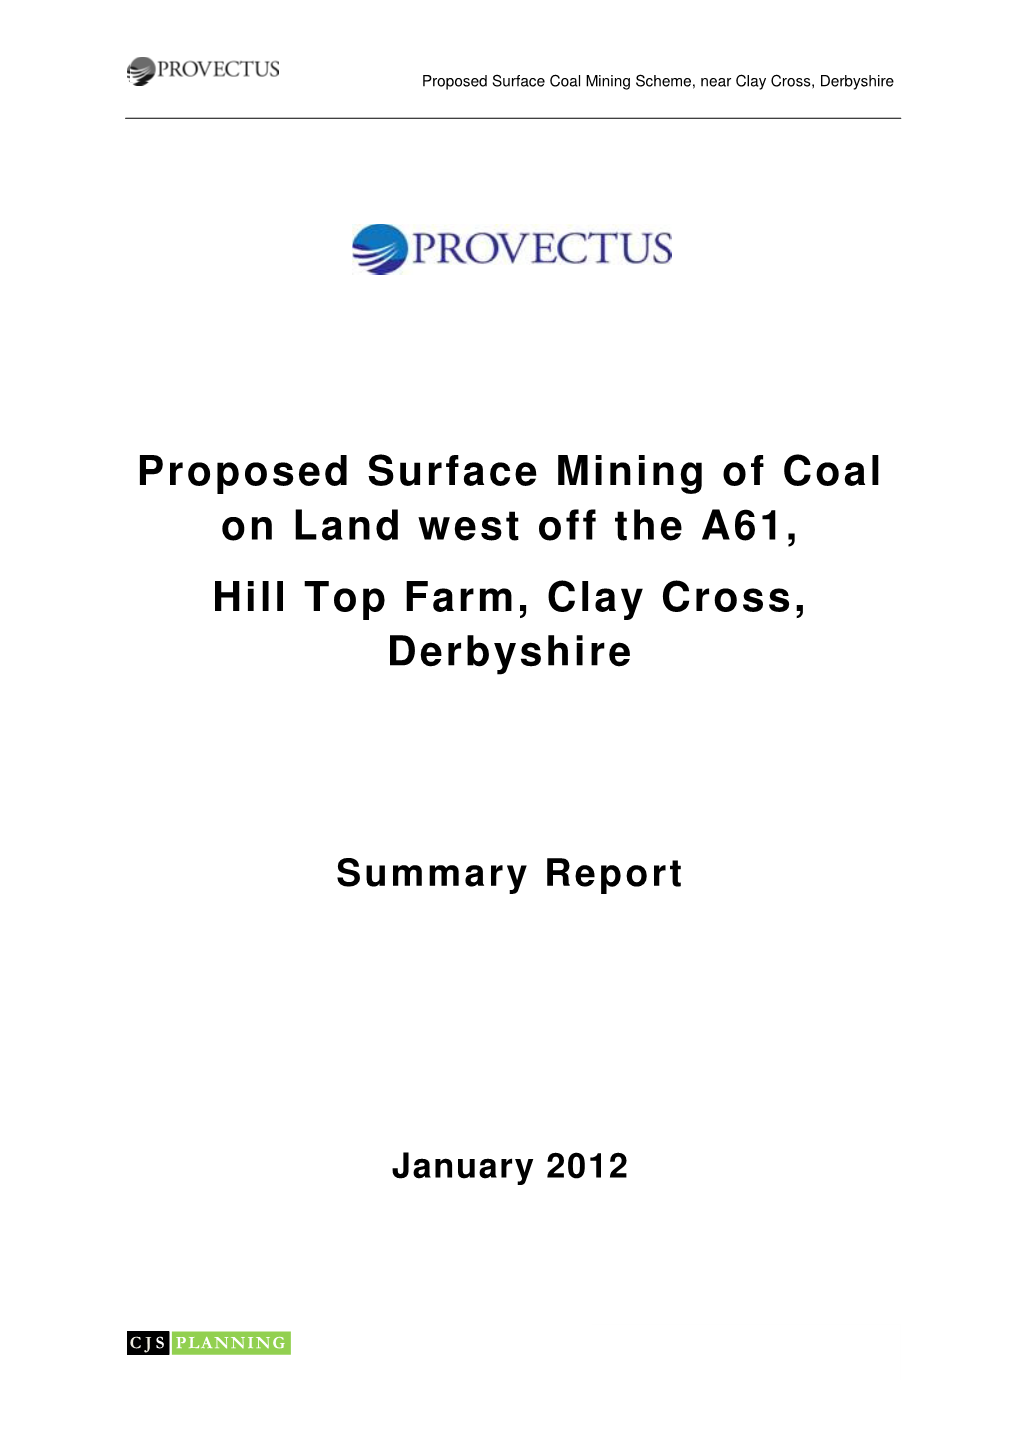 Proposed Surface Mining of Coal on Land West Off the A61, Hill Top Farm, Clay Cross, Derbyshire